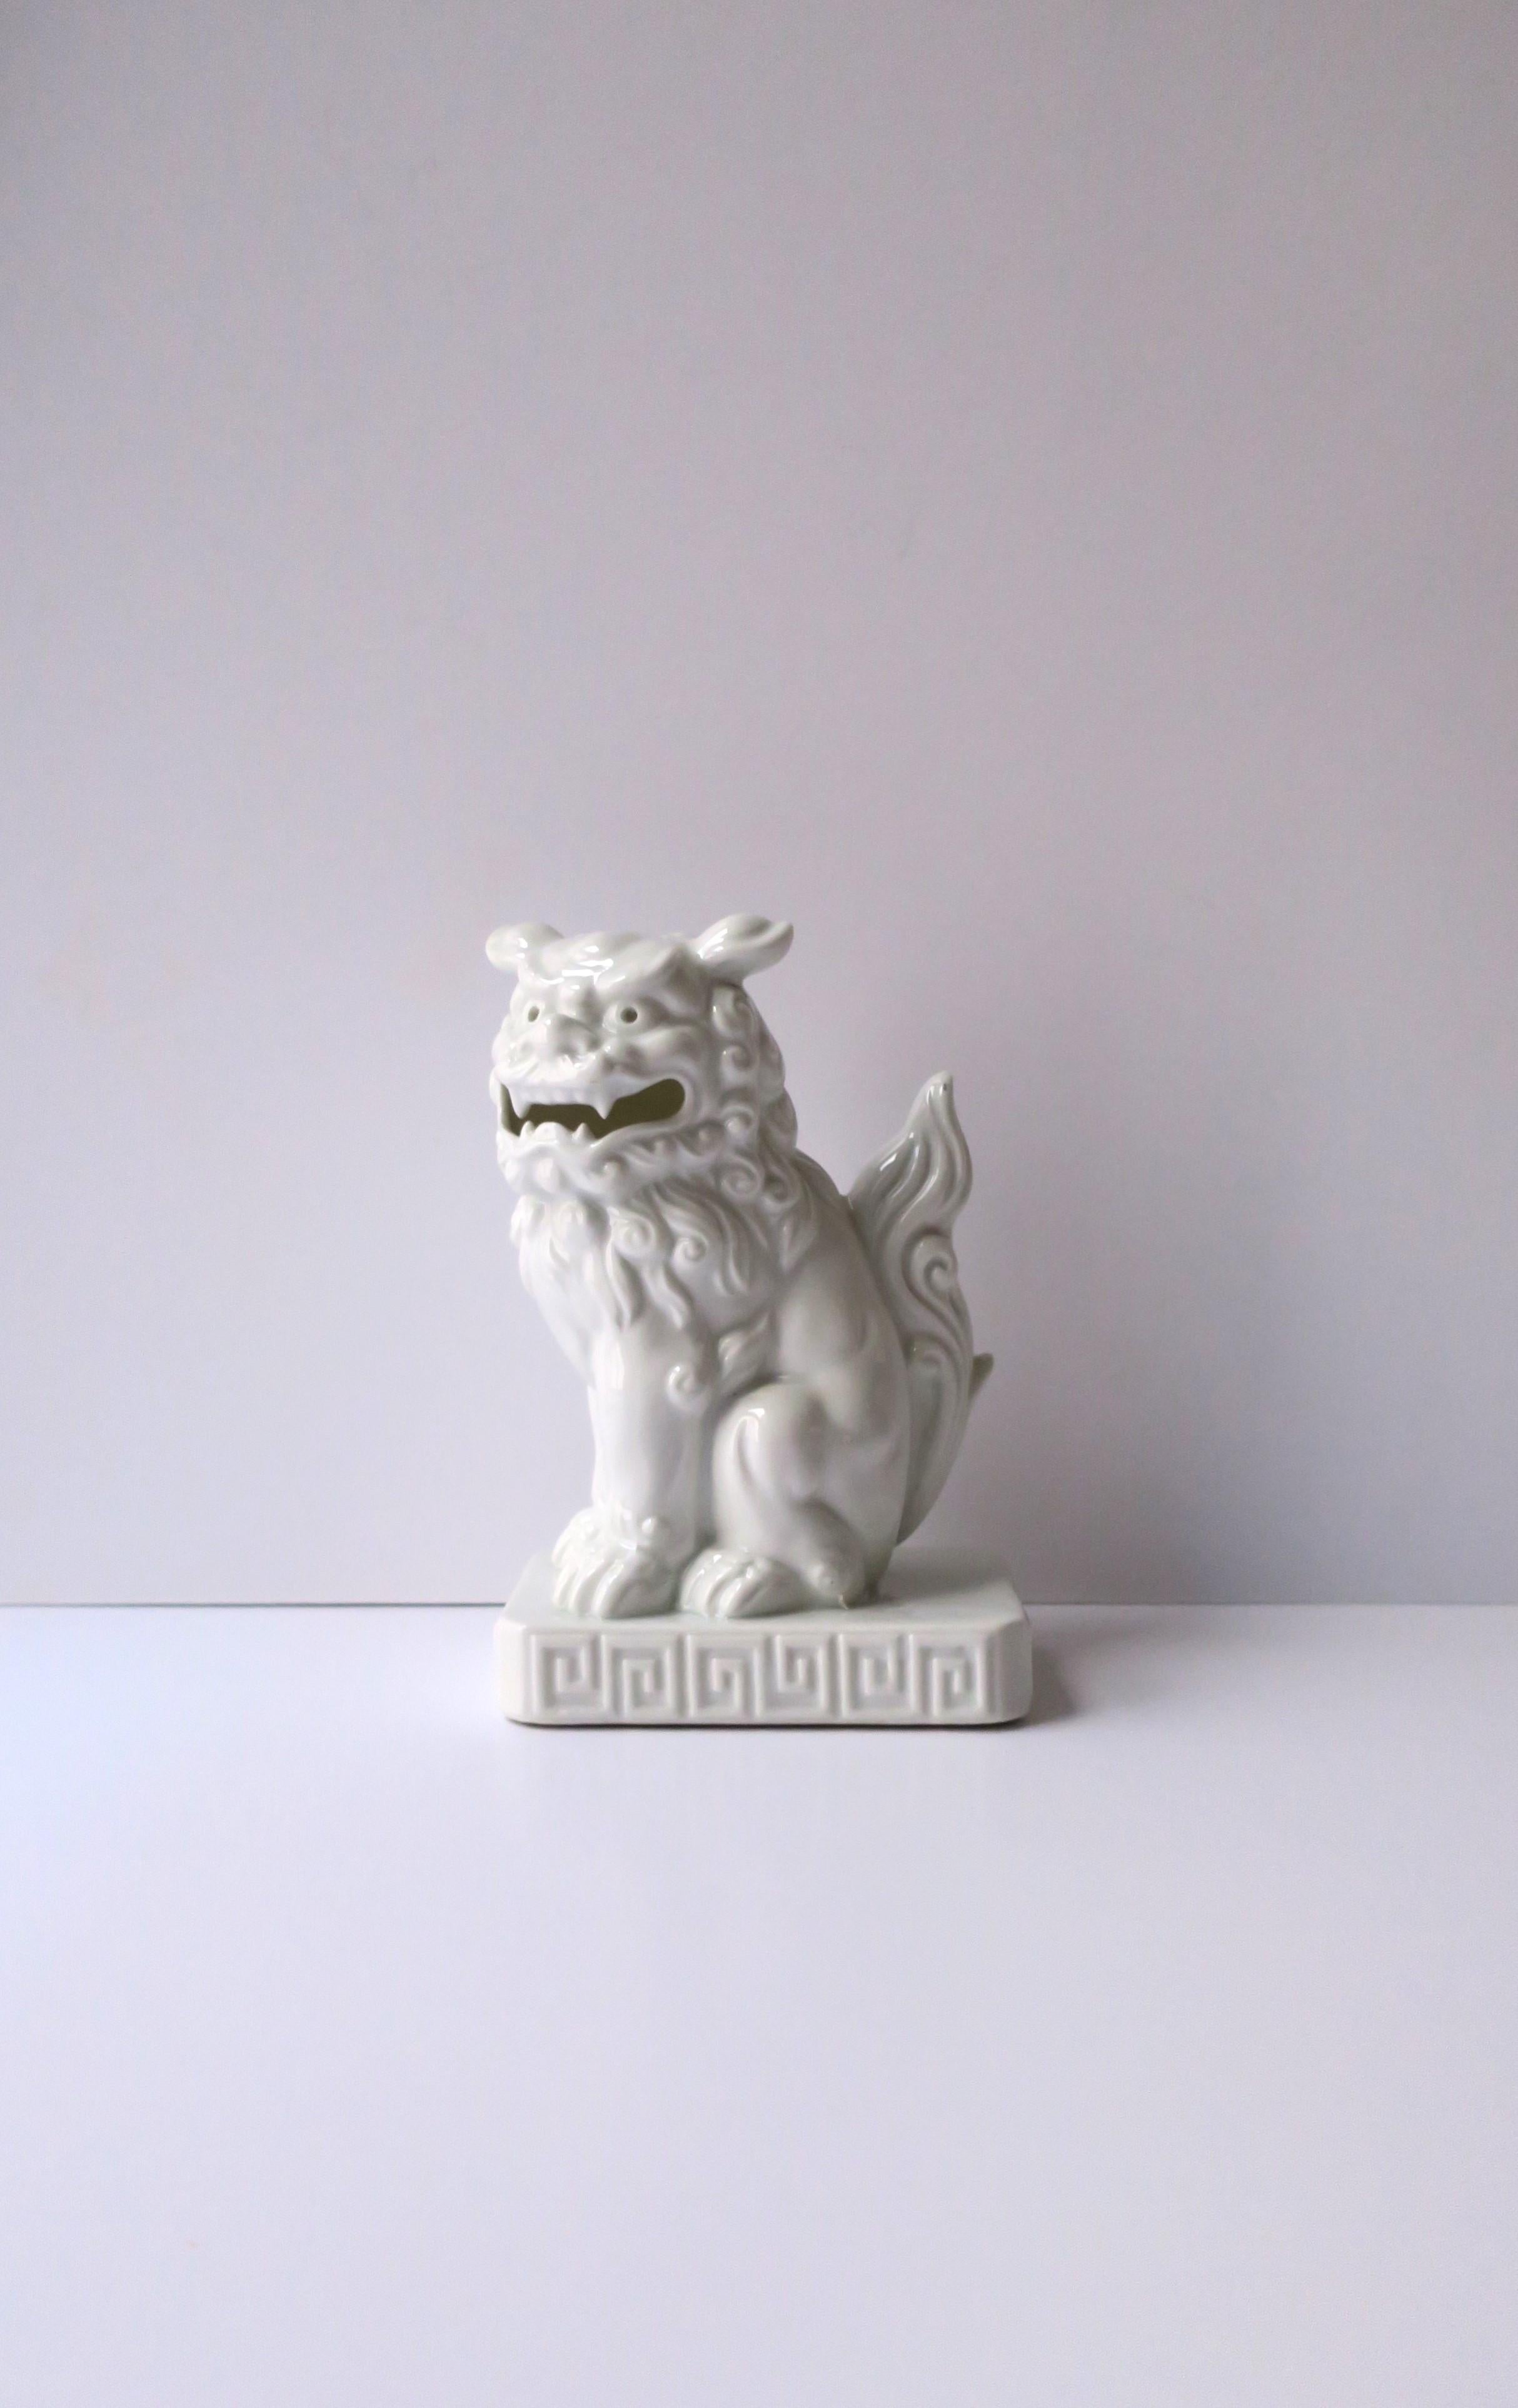 A beautiful white porcelain foo dog lion decorative object or bookend, circa early to mid-20th century, Japan. Foo dog lions, also known as komainu in Japan, are a symbol of good luck and protection. A great decorative object for a shelf, library,